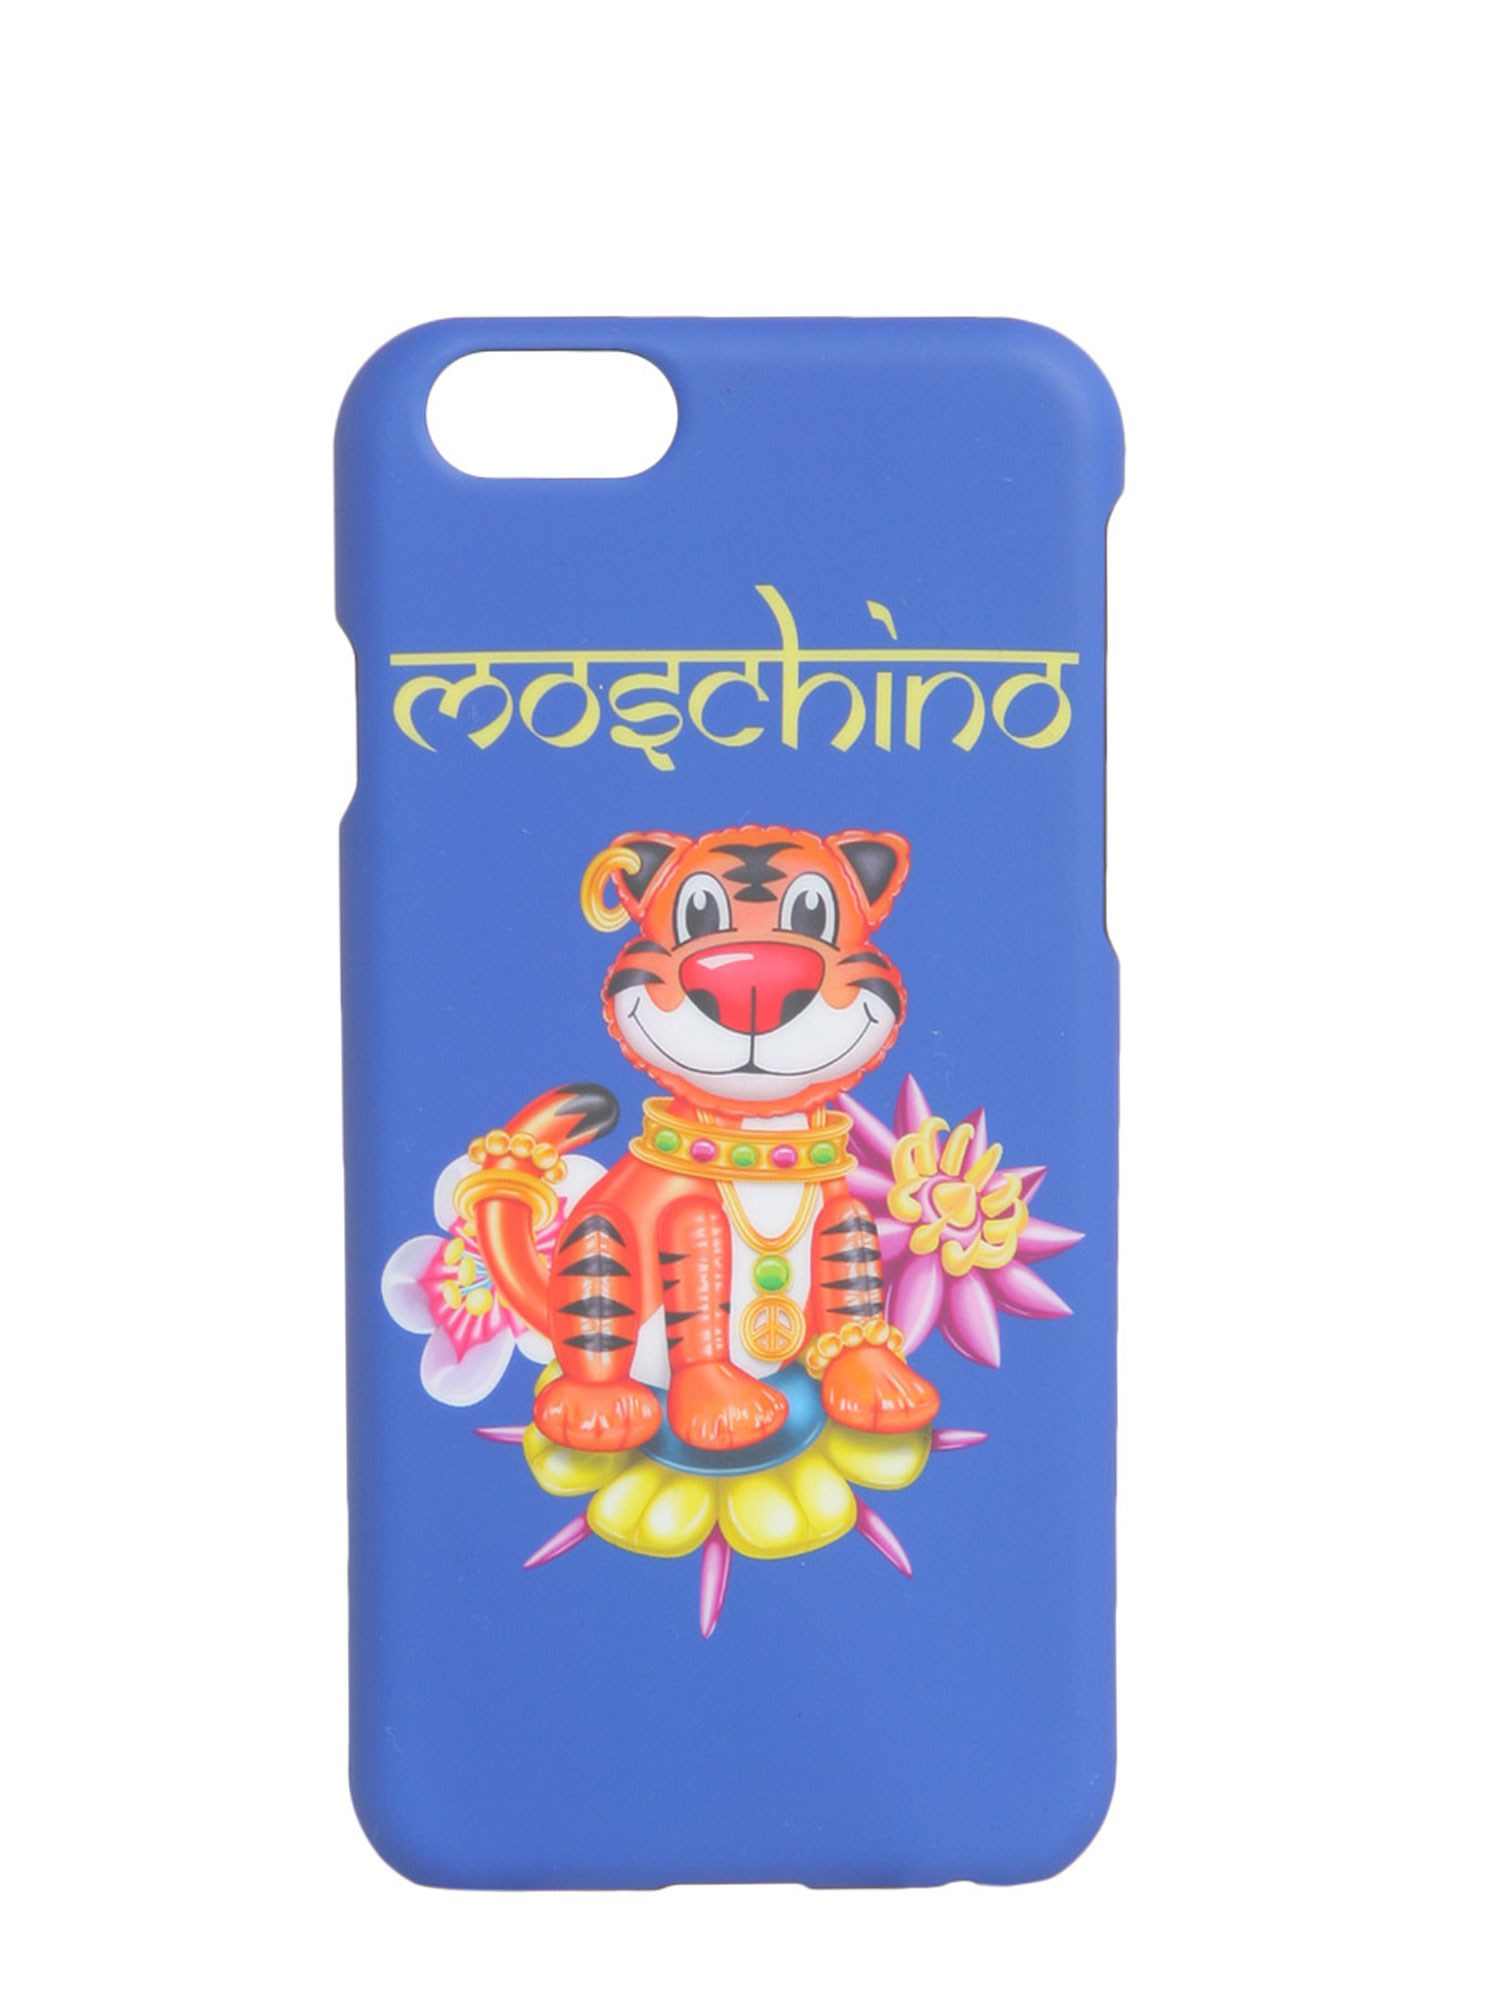 moschino iphone 6/6s cover